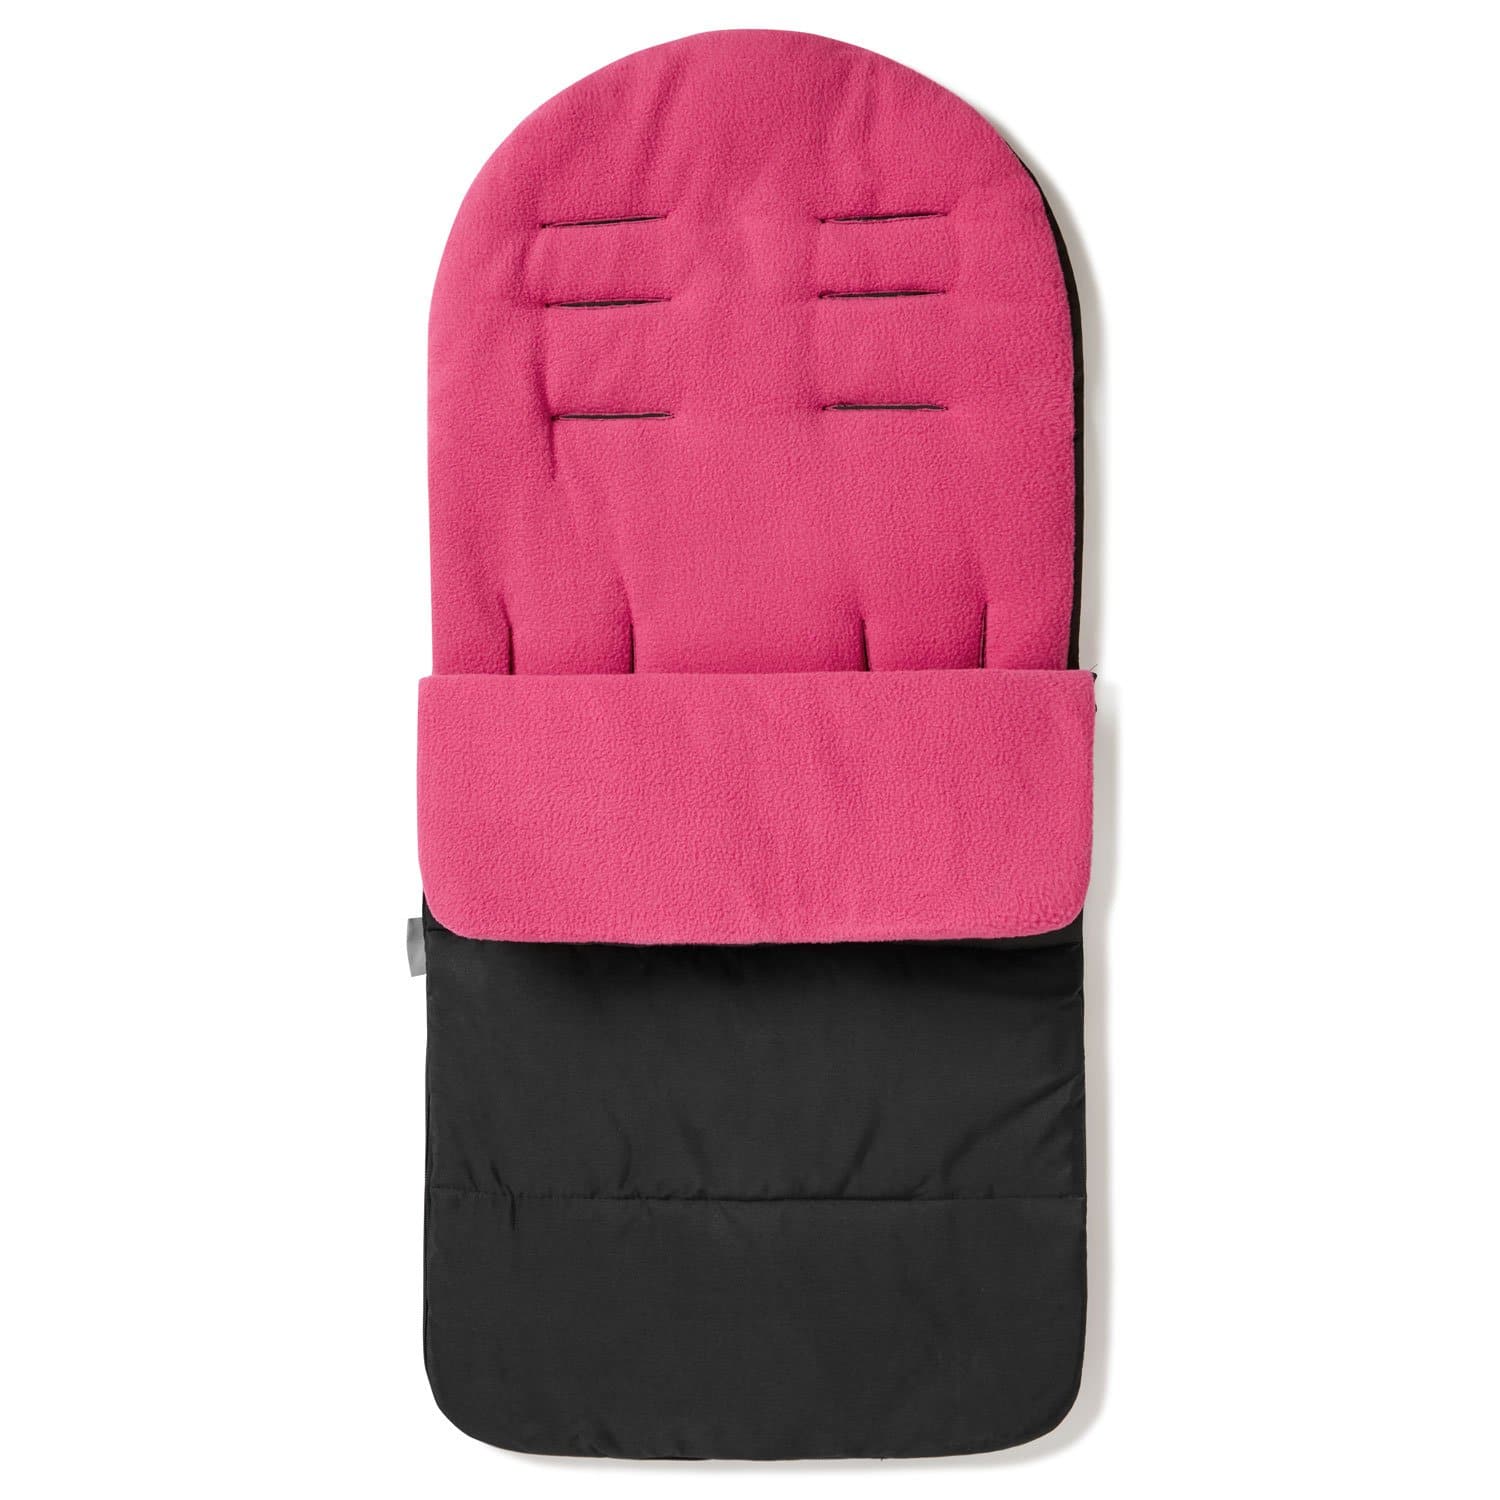 Premium Footmuff / Cosy Toes Compatible with Cybex - Candy Pink / Fits All Models | For Your Little One